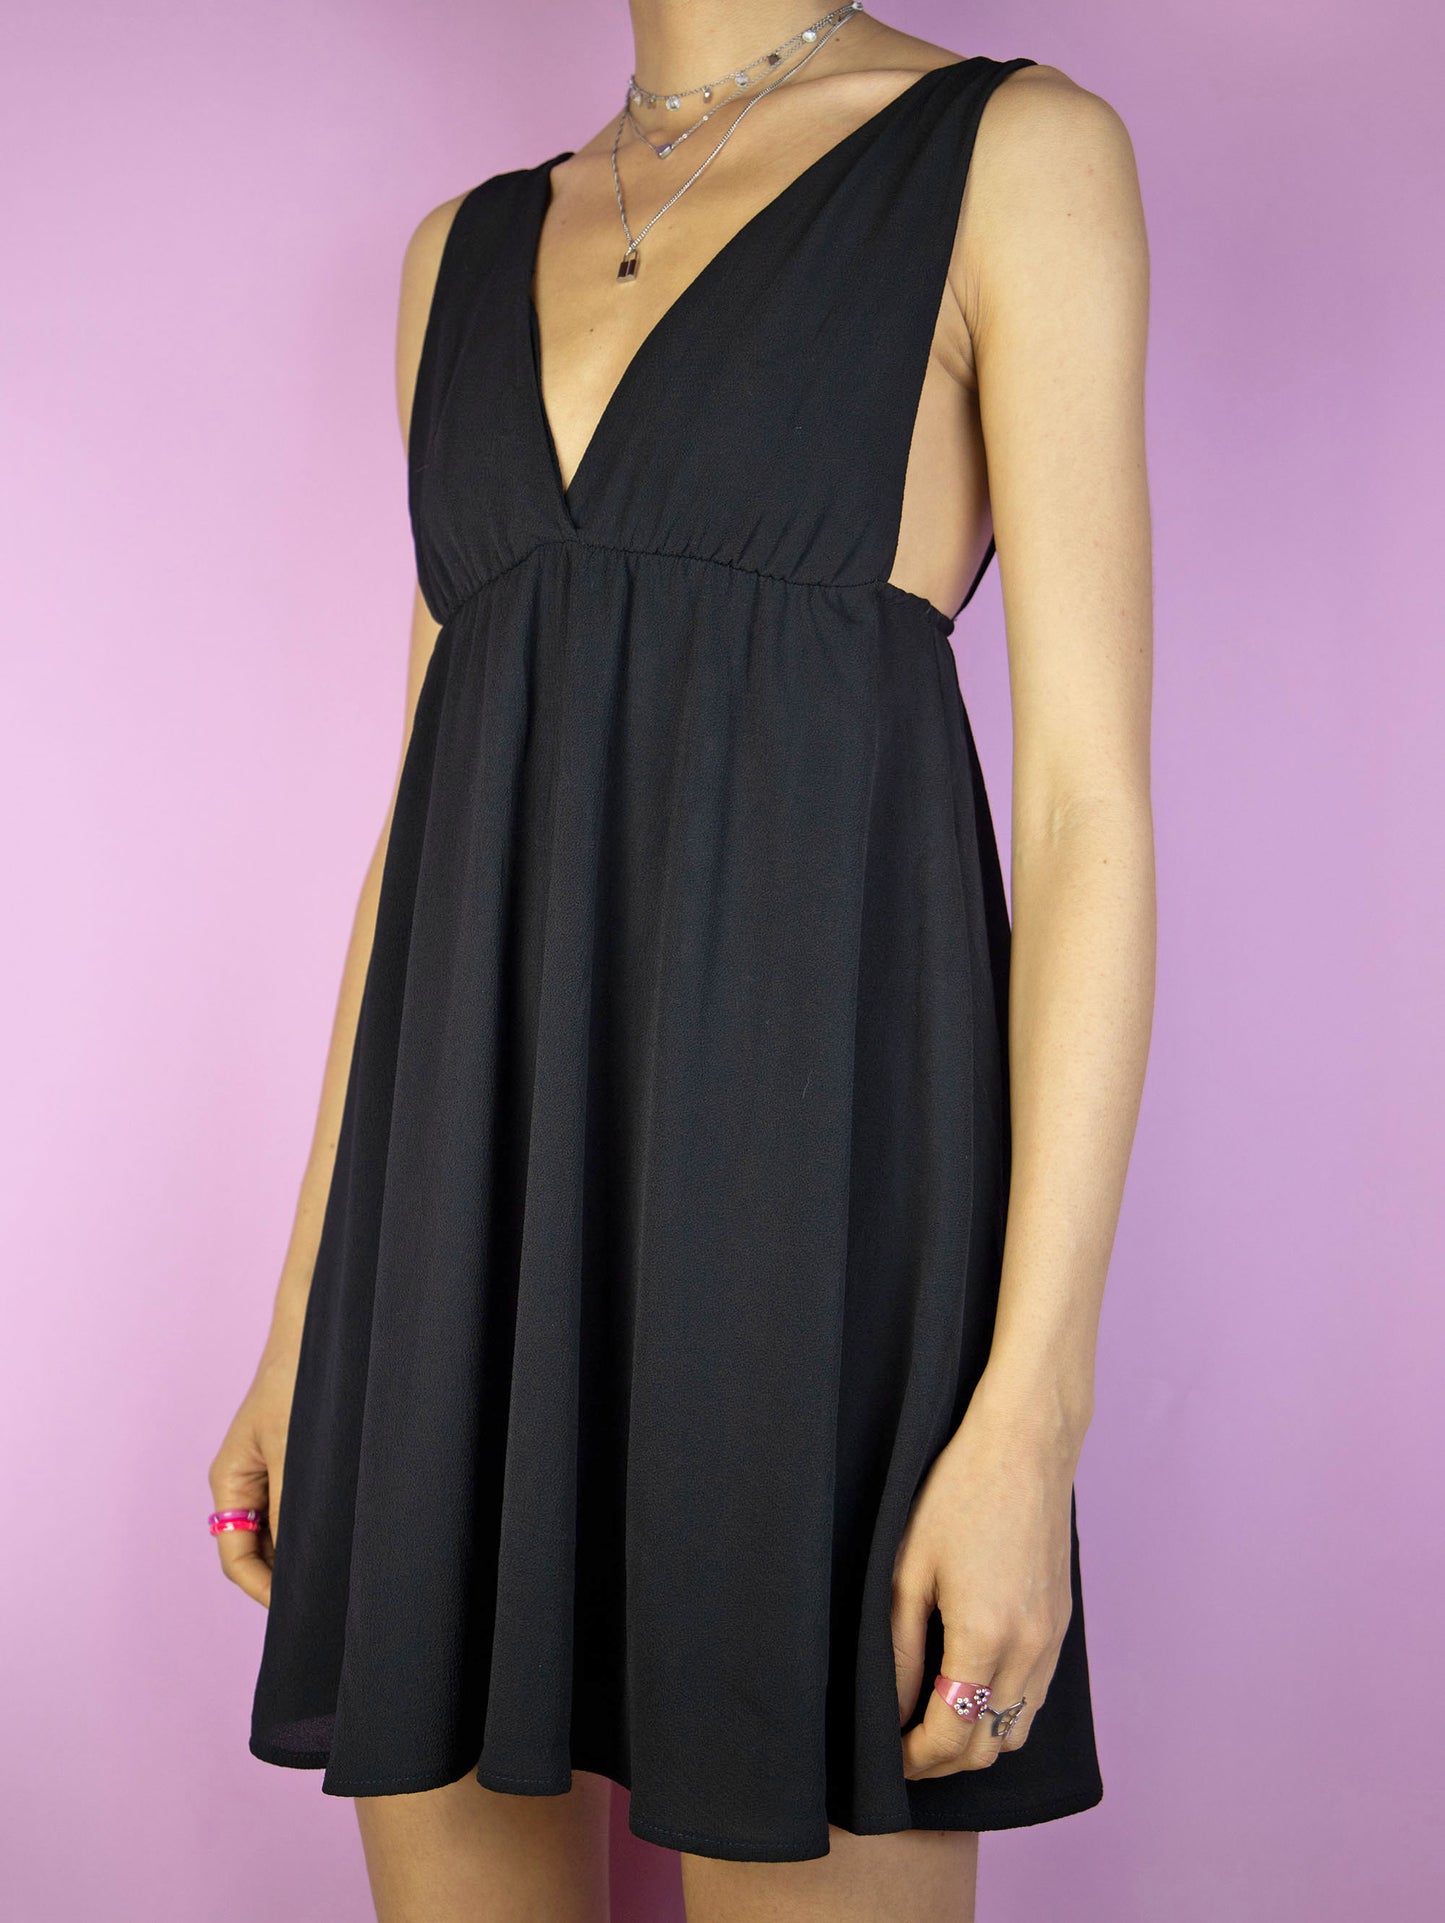 The Y2K Black Party Mini Dress is a vintage 2000s party night out style sleeveless fit and flare dress with a deep v-neck.